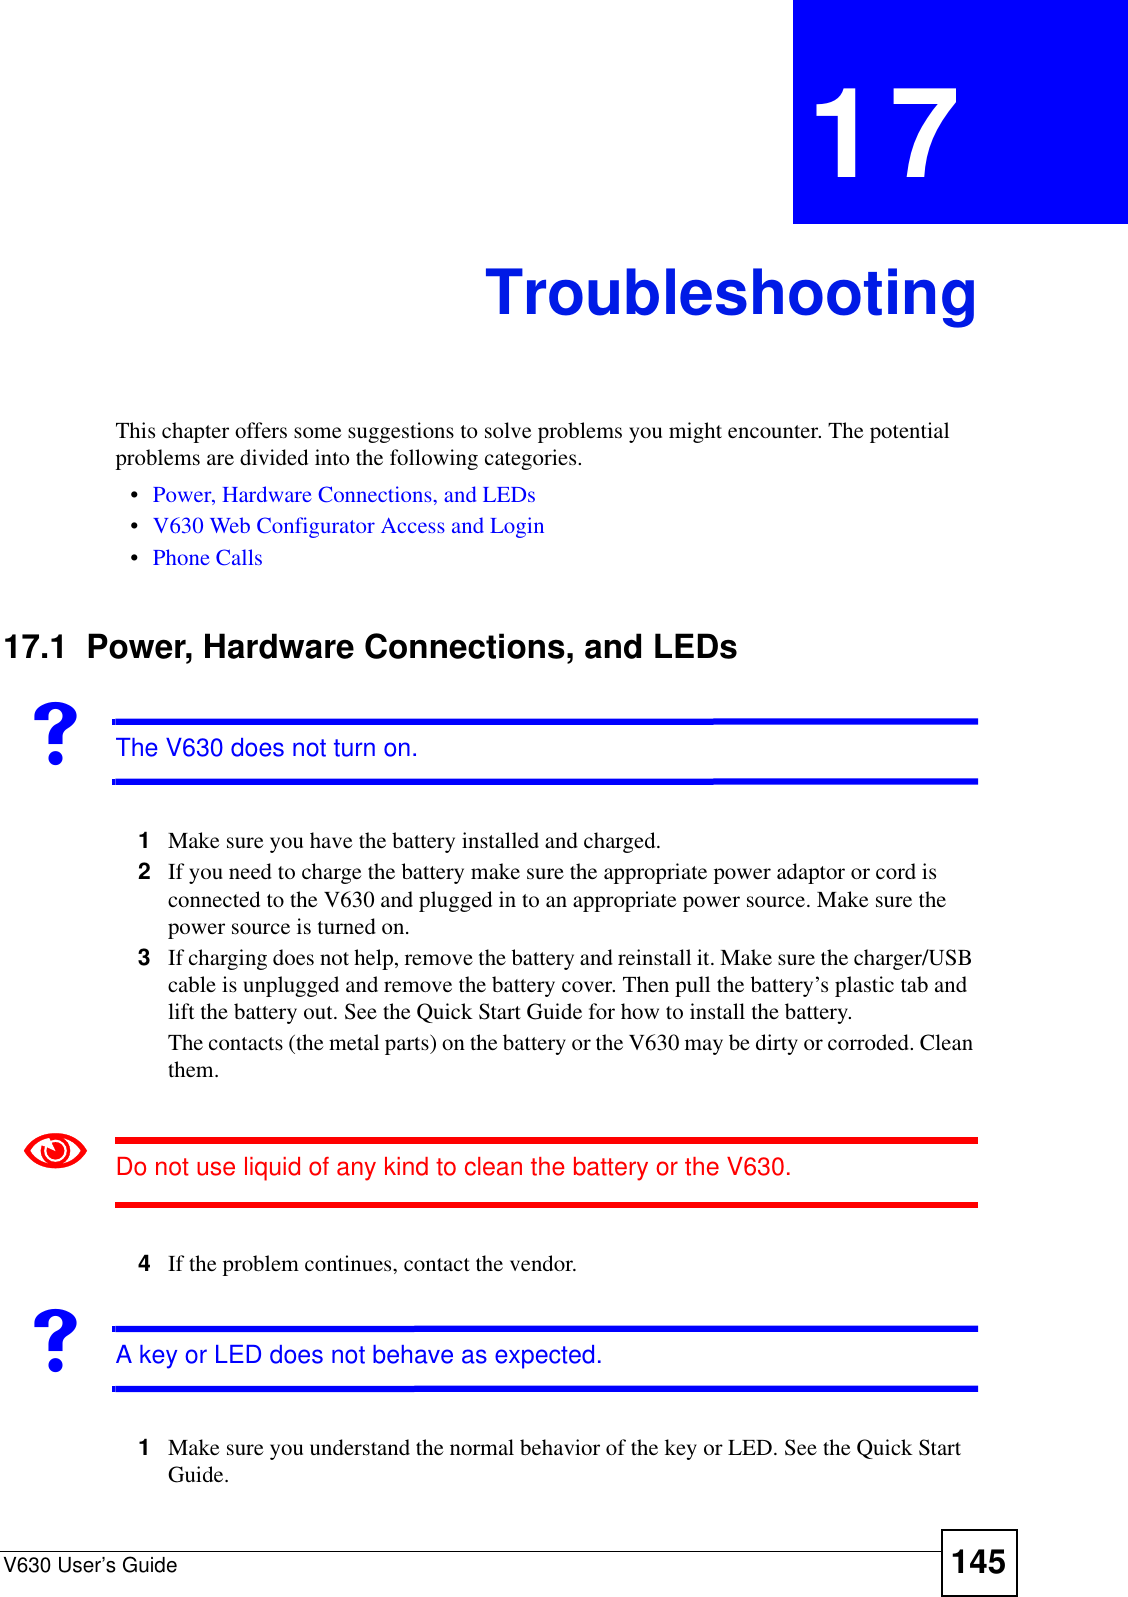 V630 User’s Guide 145CHAPTER  17 TroubleshootingThis chapter offers some suggestions to solve problems you might encounter. The potential problems are divided into the following categories. •Power, Hardware Connections, and LEDs•V630 Web Configurator Access and Login•Phone Calls17.1  Power, Hardware Connections, and LEDsVThe V630 does not turn on. 1Make sure you have the battery installed and charged. 2If you need to charge the battery make sure the appropriate power adaptor or cord is connected to the V630 and plugged in to an appropriate power source. Make sure the power source is turned on.3If charging does not help, remove the battery and reinstall it. Make sure the charger/USB cable is unplugged and remove the battery cover. Then pull the battery’s plastic tab and lift the battery out. See the Quick Start Guide for how to install the battery.The contacts (the metal parts) on the battery or the V630 may be dirty or corroded. Clean them.1Do not use liquid of any kind to clean the battery or the V630.4If the problem continues, contact the vendor.VA key or LED does not behave as expected.1Make sure you understand the normal behavior of the key or LED. See the Quick Start Guide.